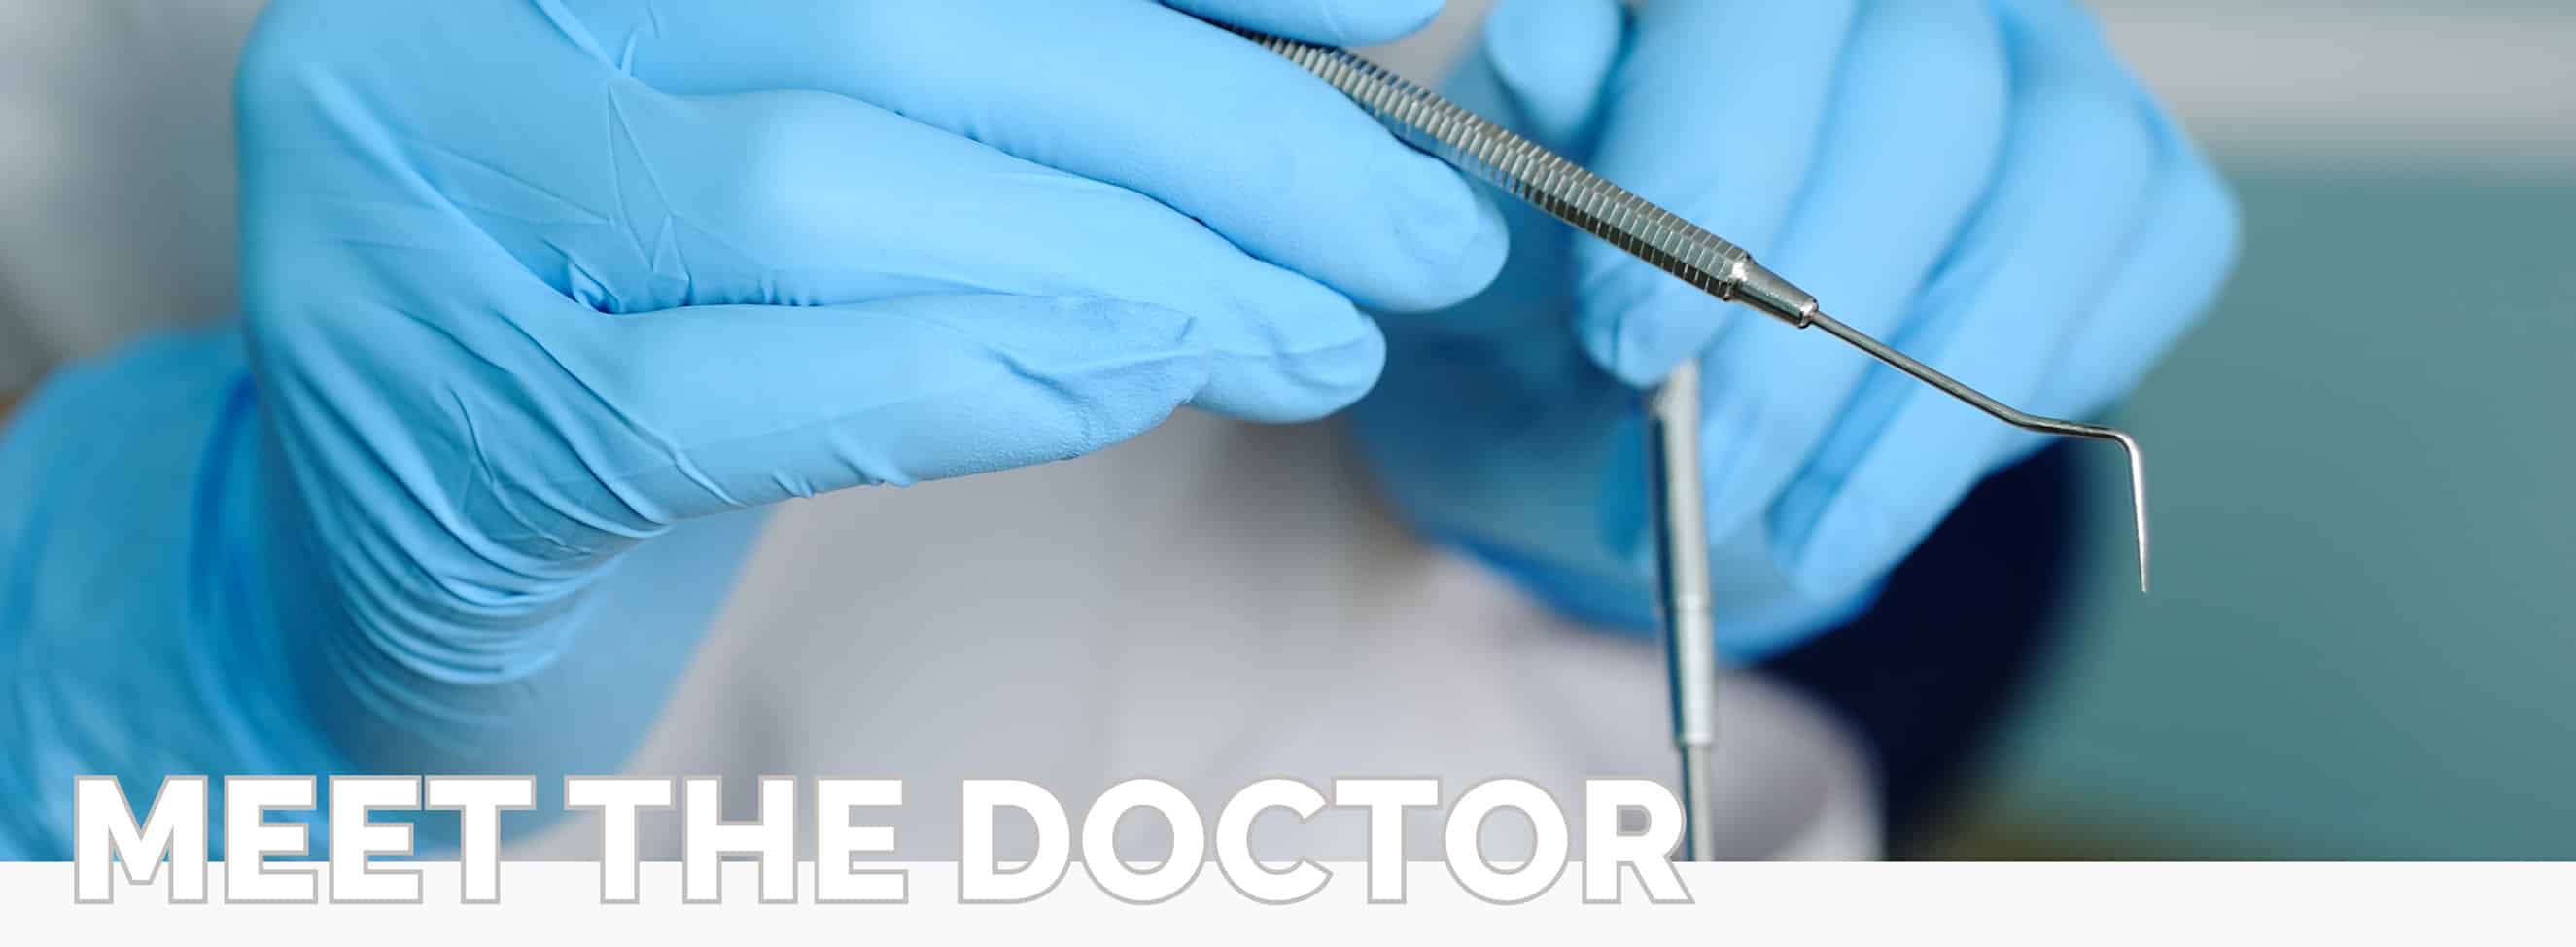 A dentists hands holding some dental tools with the text, "Meet the Doctor" at Kelly Family Dentistry